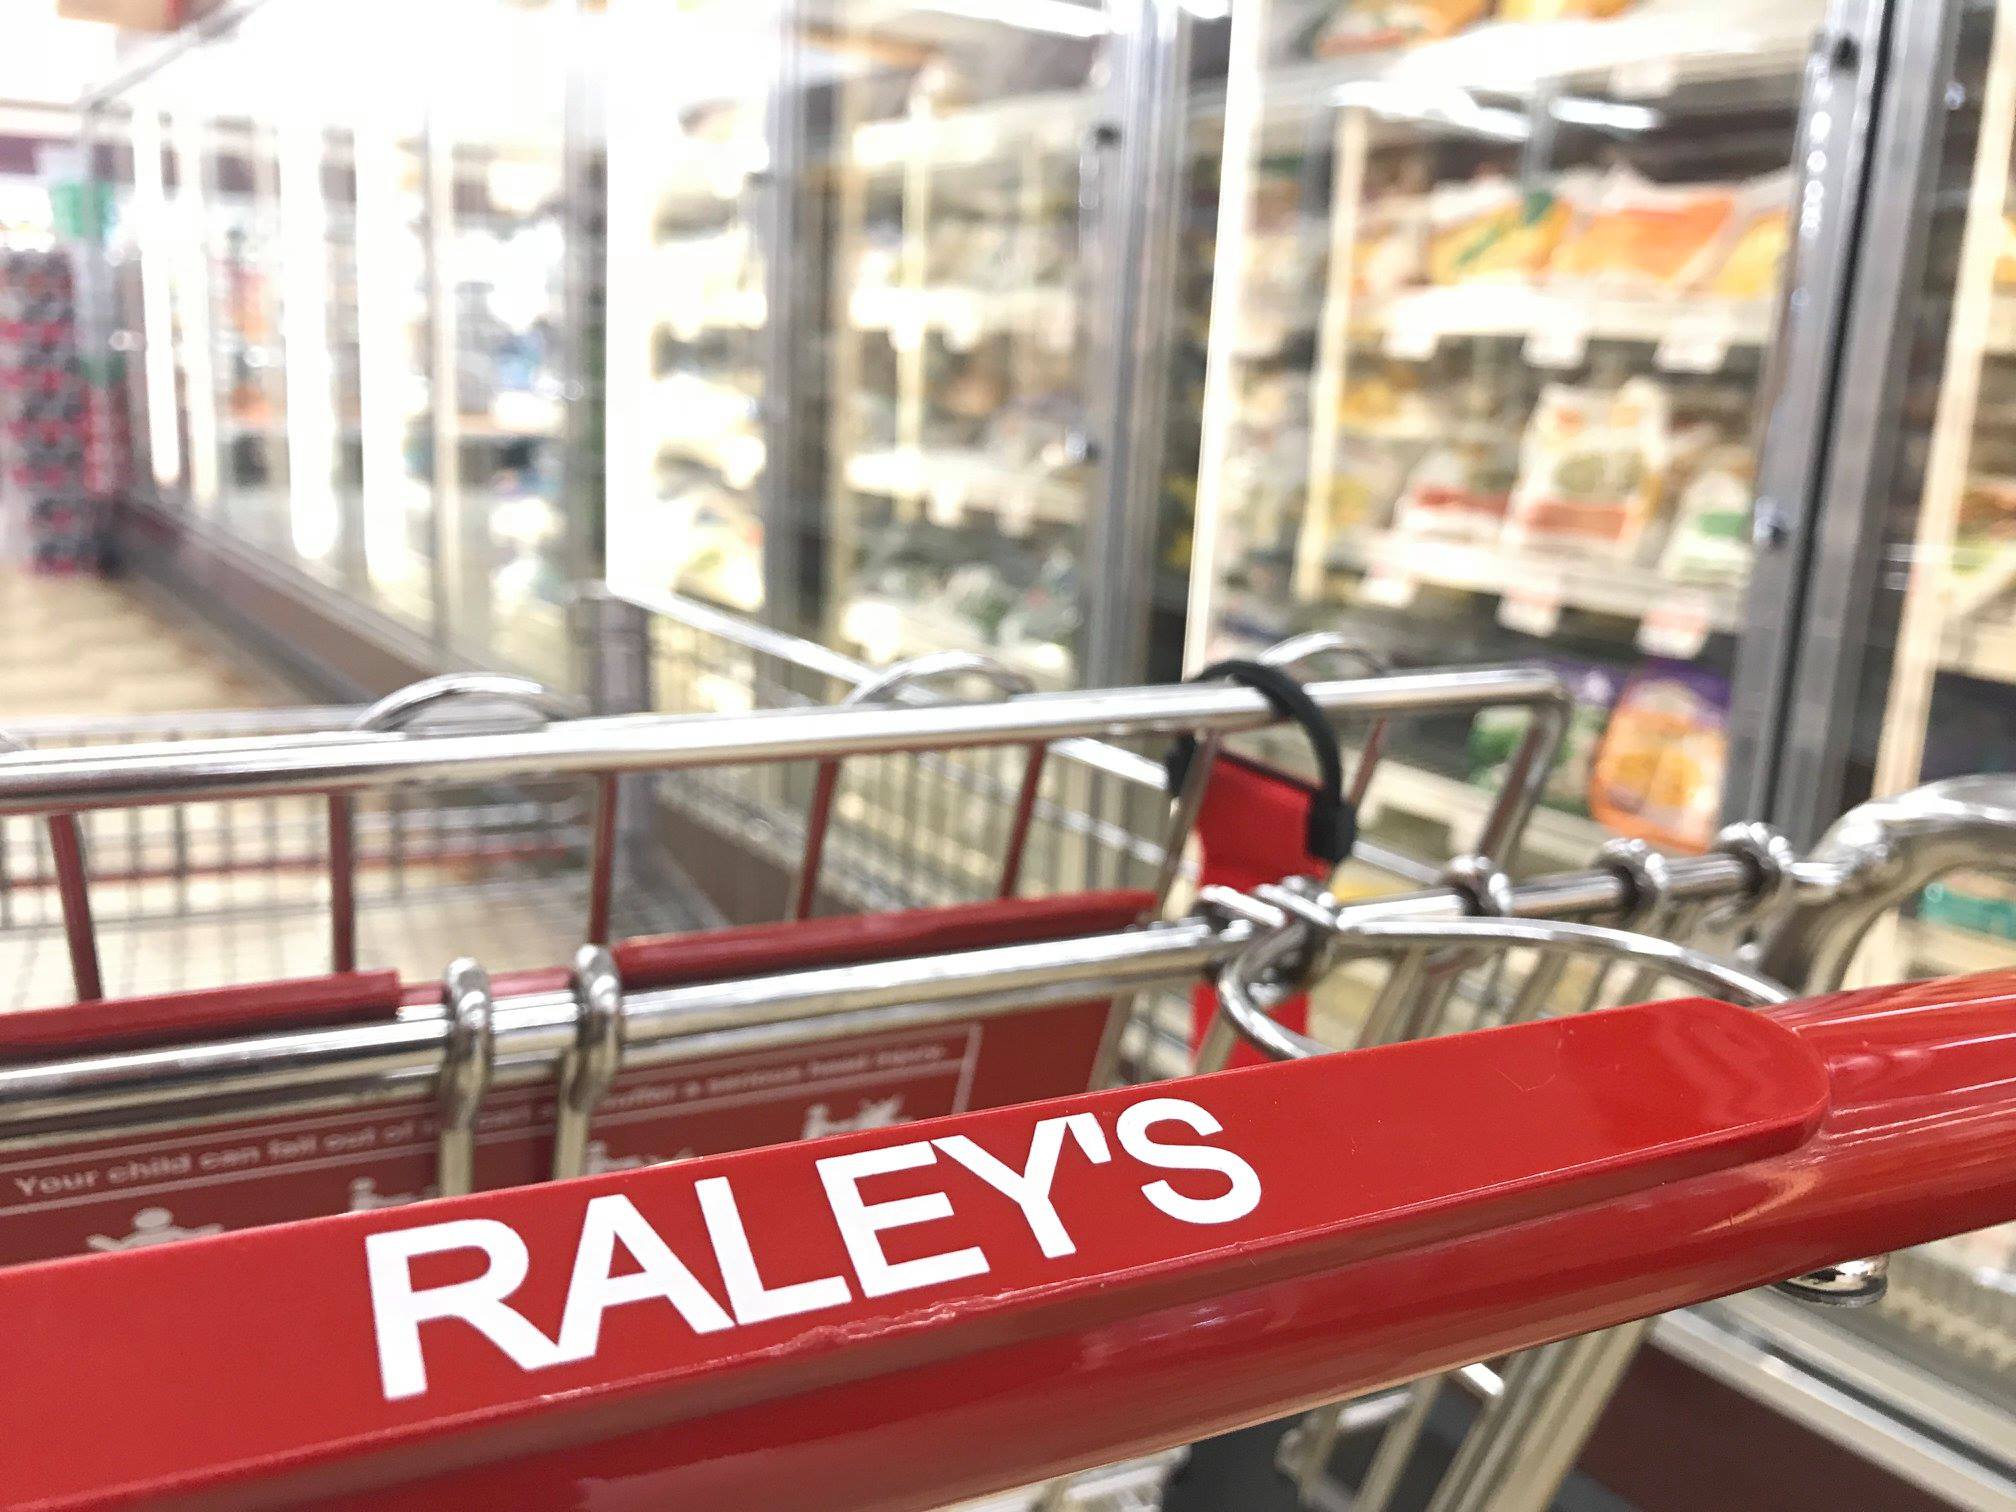 Raley’s implements Itasca Magic Computer Generated Ordering